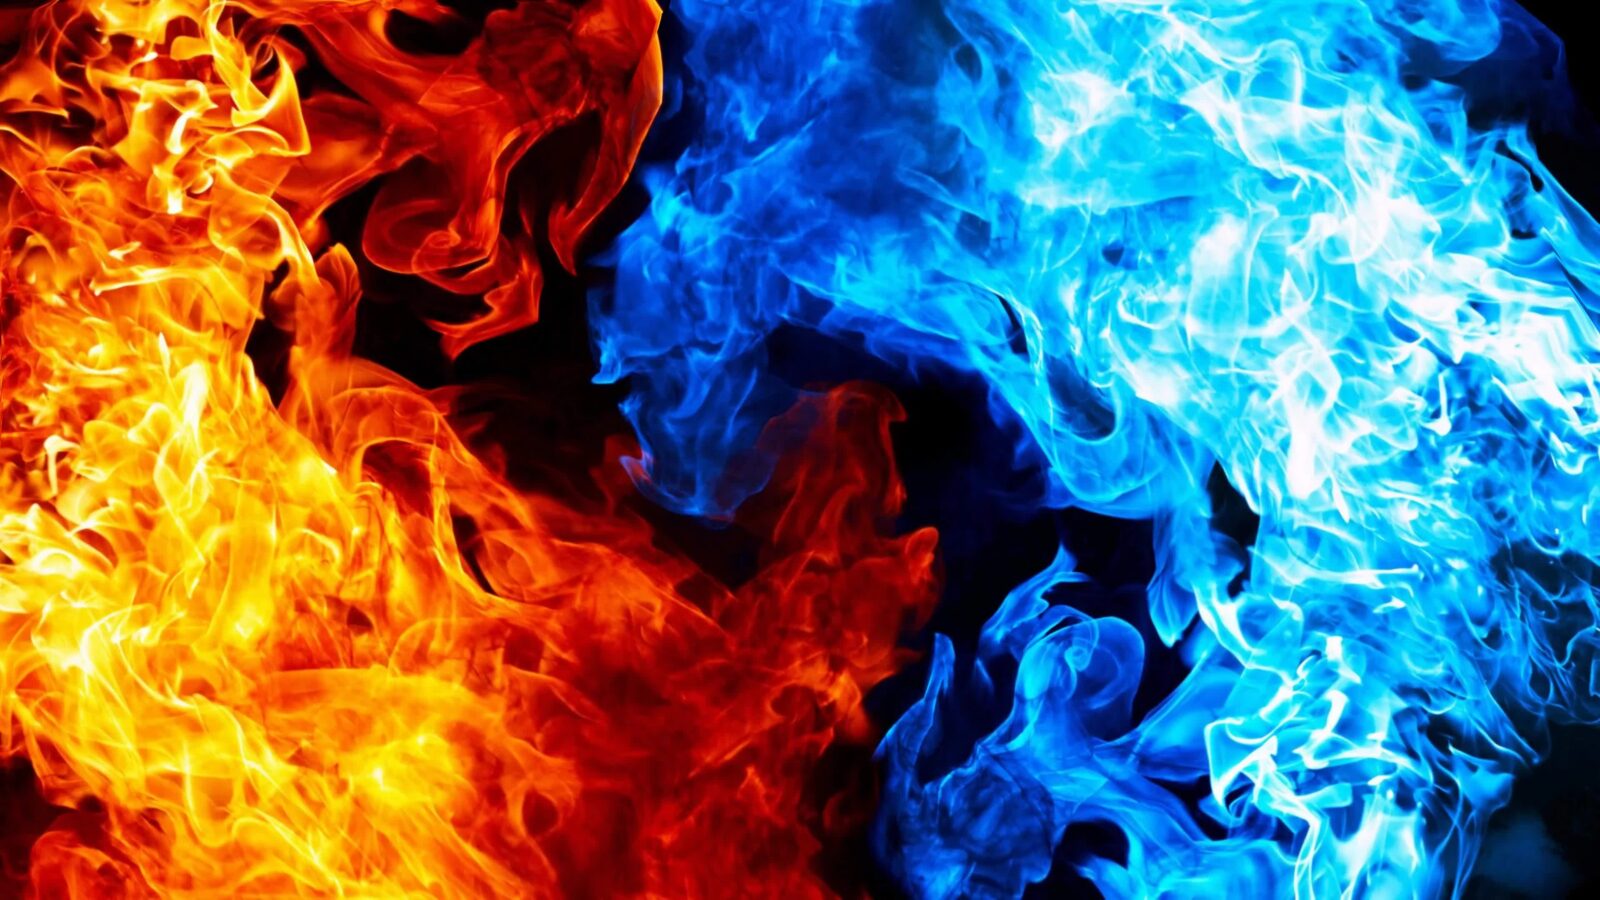 Red Flame and Blue Fire 4K Abstract Artwork - Free Live Wallpaper